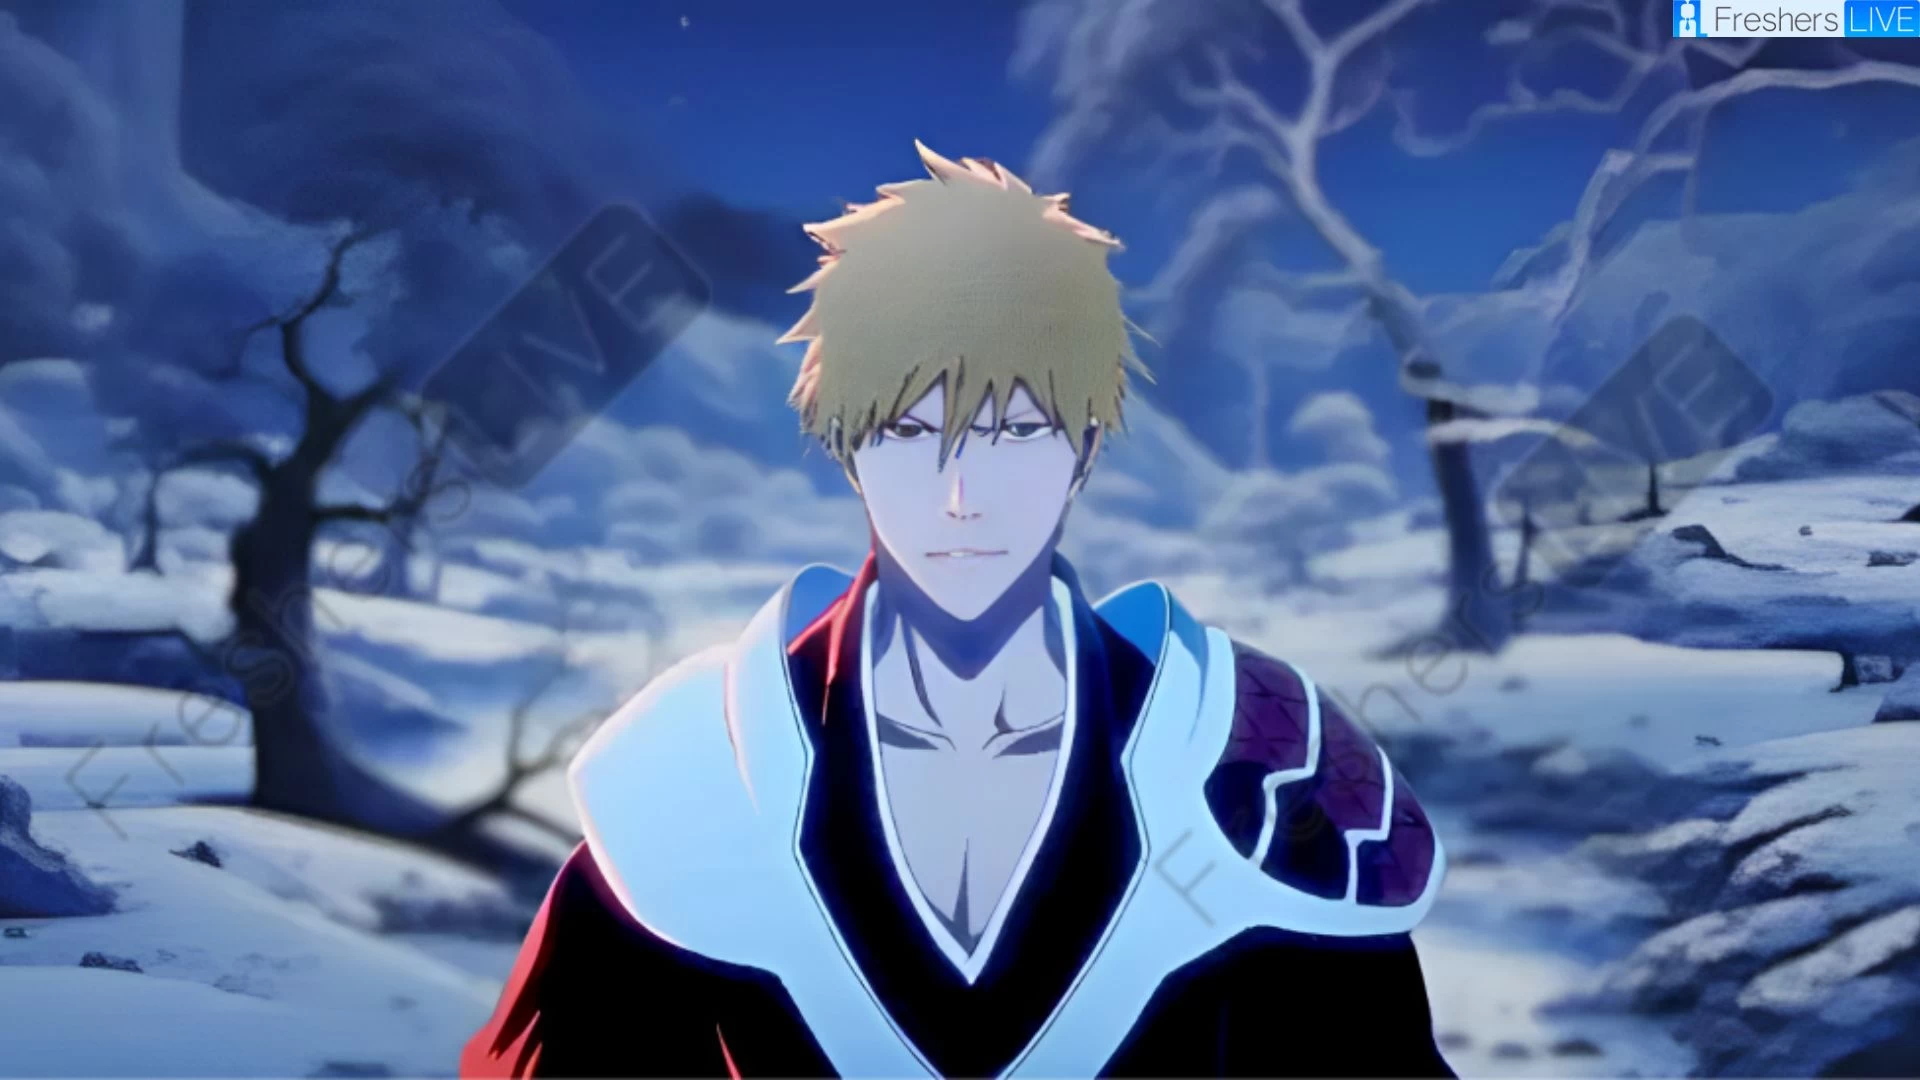 Bleach Thousand Year Blood War Season 2 Episode 11 Release Date and Time, Countdown, When Is It Coming Out?